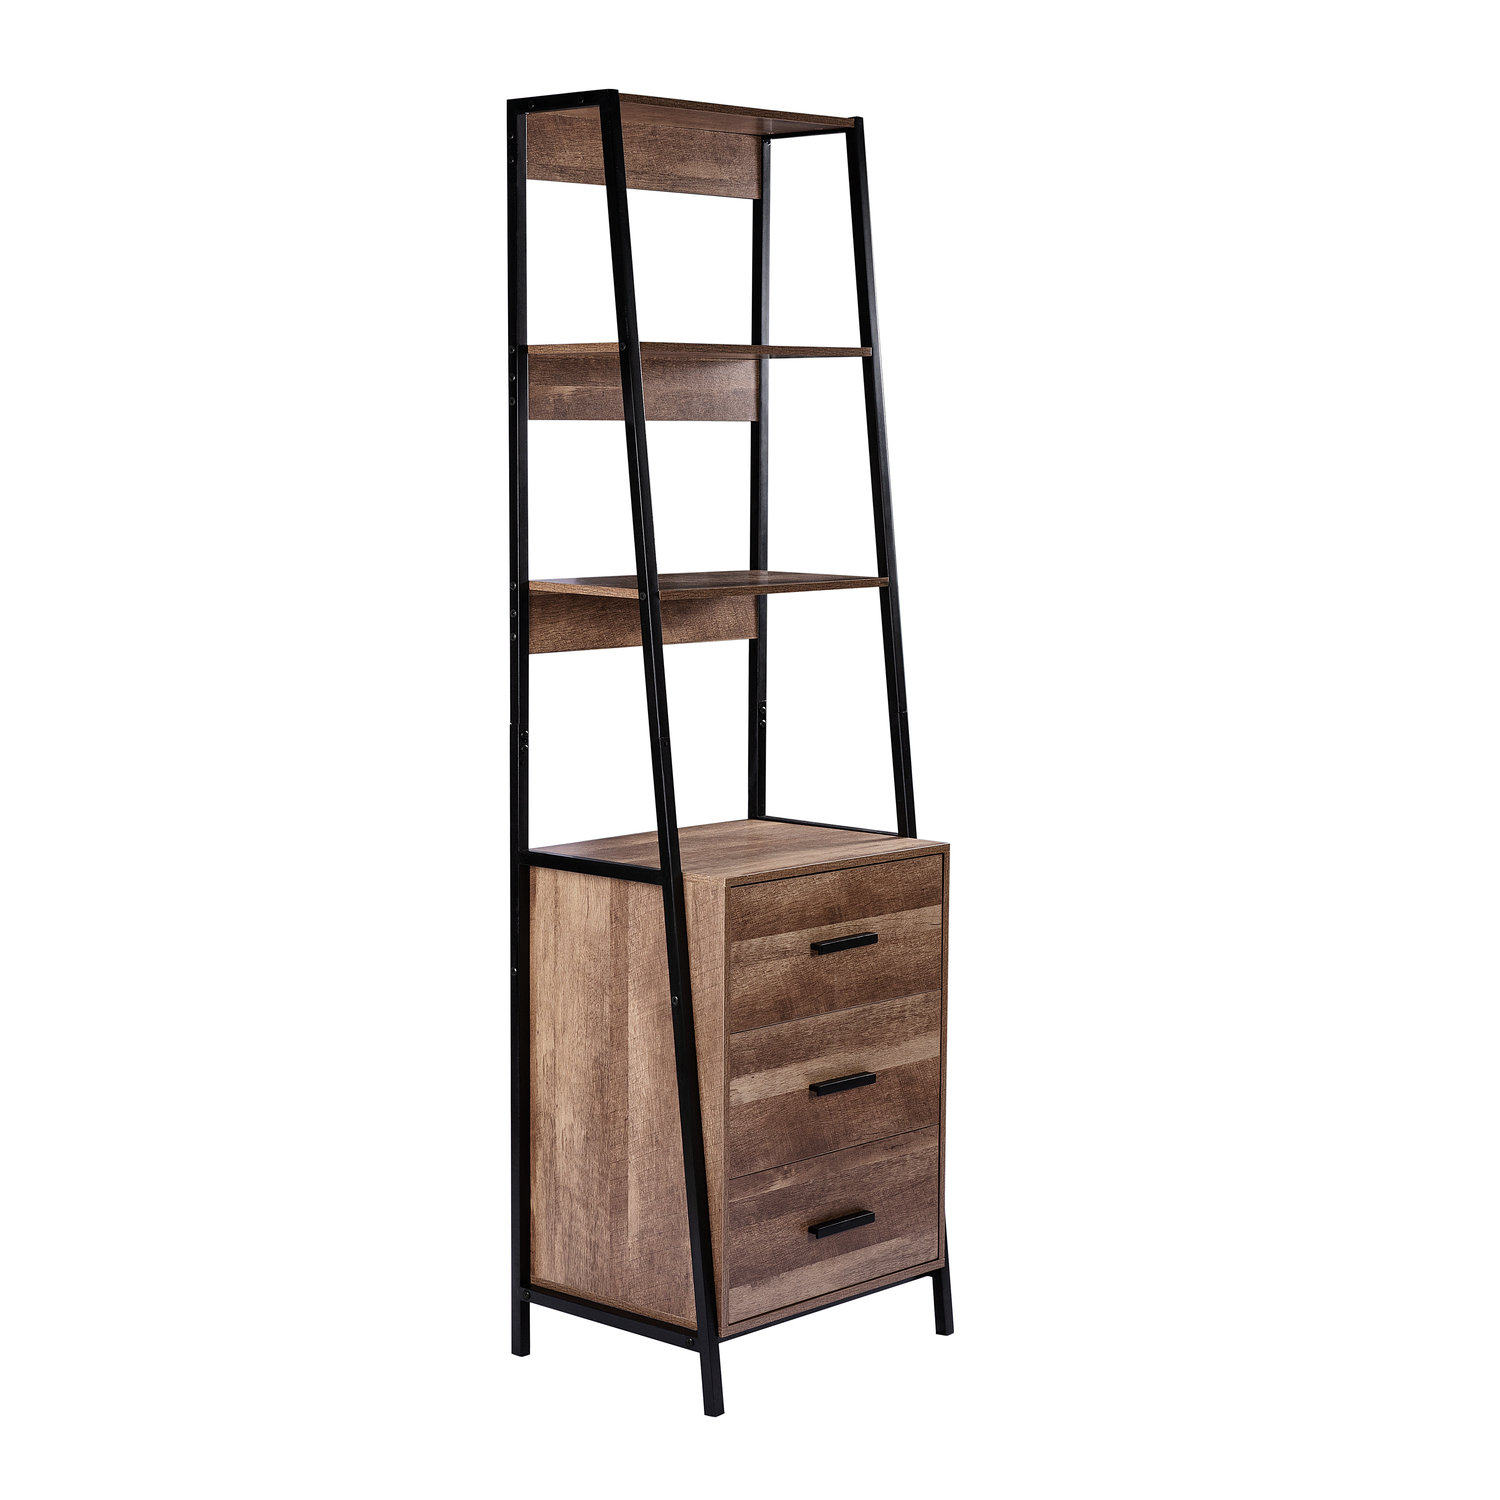 17 Stories Daneel 33'' Wide Lateral Filing Cabinet with Open Storage Shelves  Bookshelf & Reviews